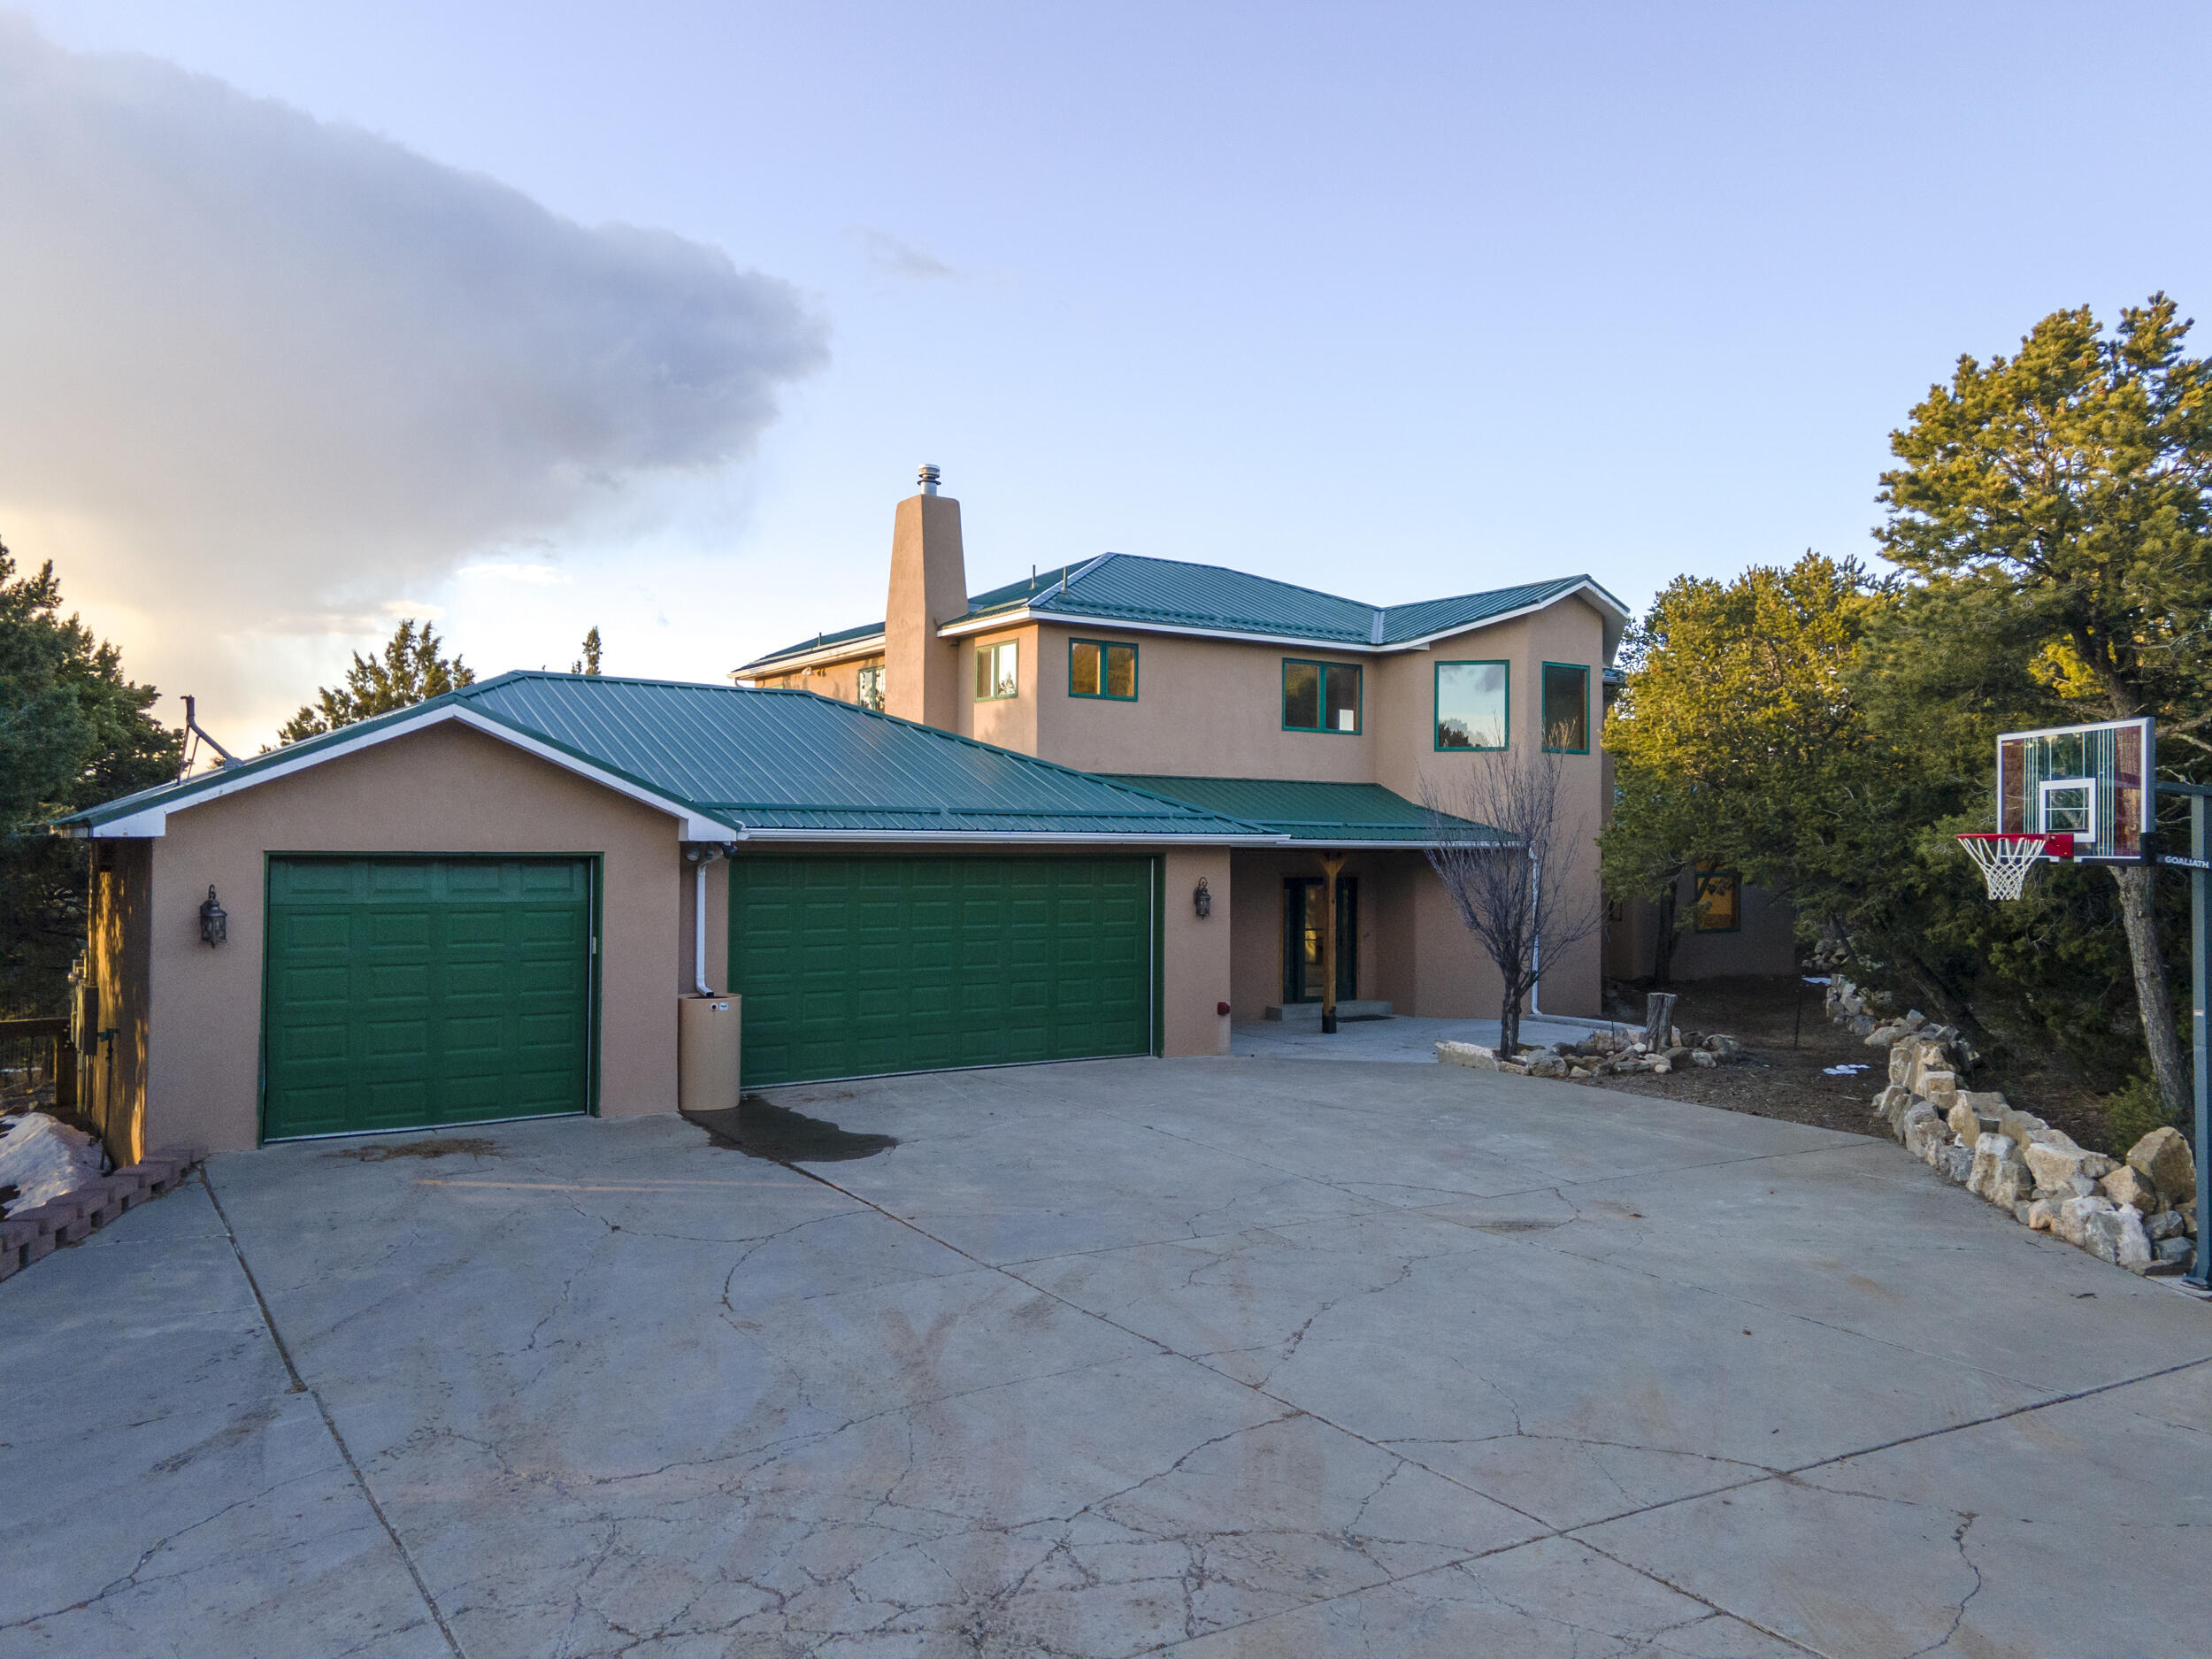 26 Asher Lane, Tijeras, New Mexico 87059, 3 Bedrooms Bedrooms, ,3 BathroomsBathrooms,Residential,For Sale,26 Asher Lane,1059450